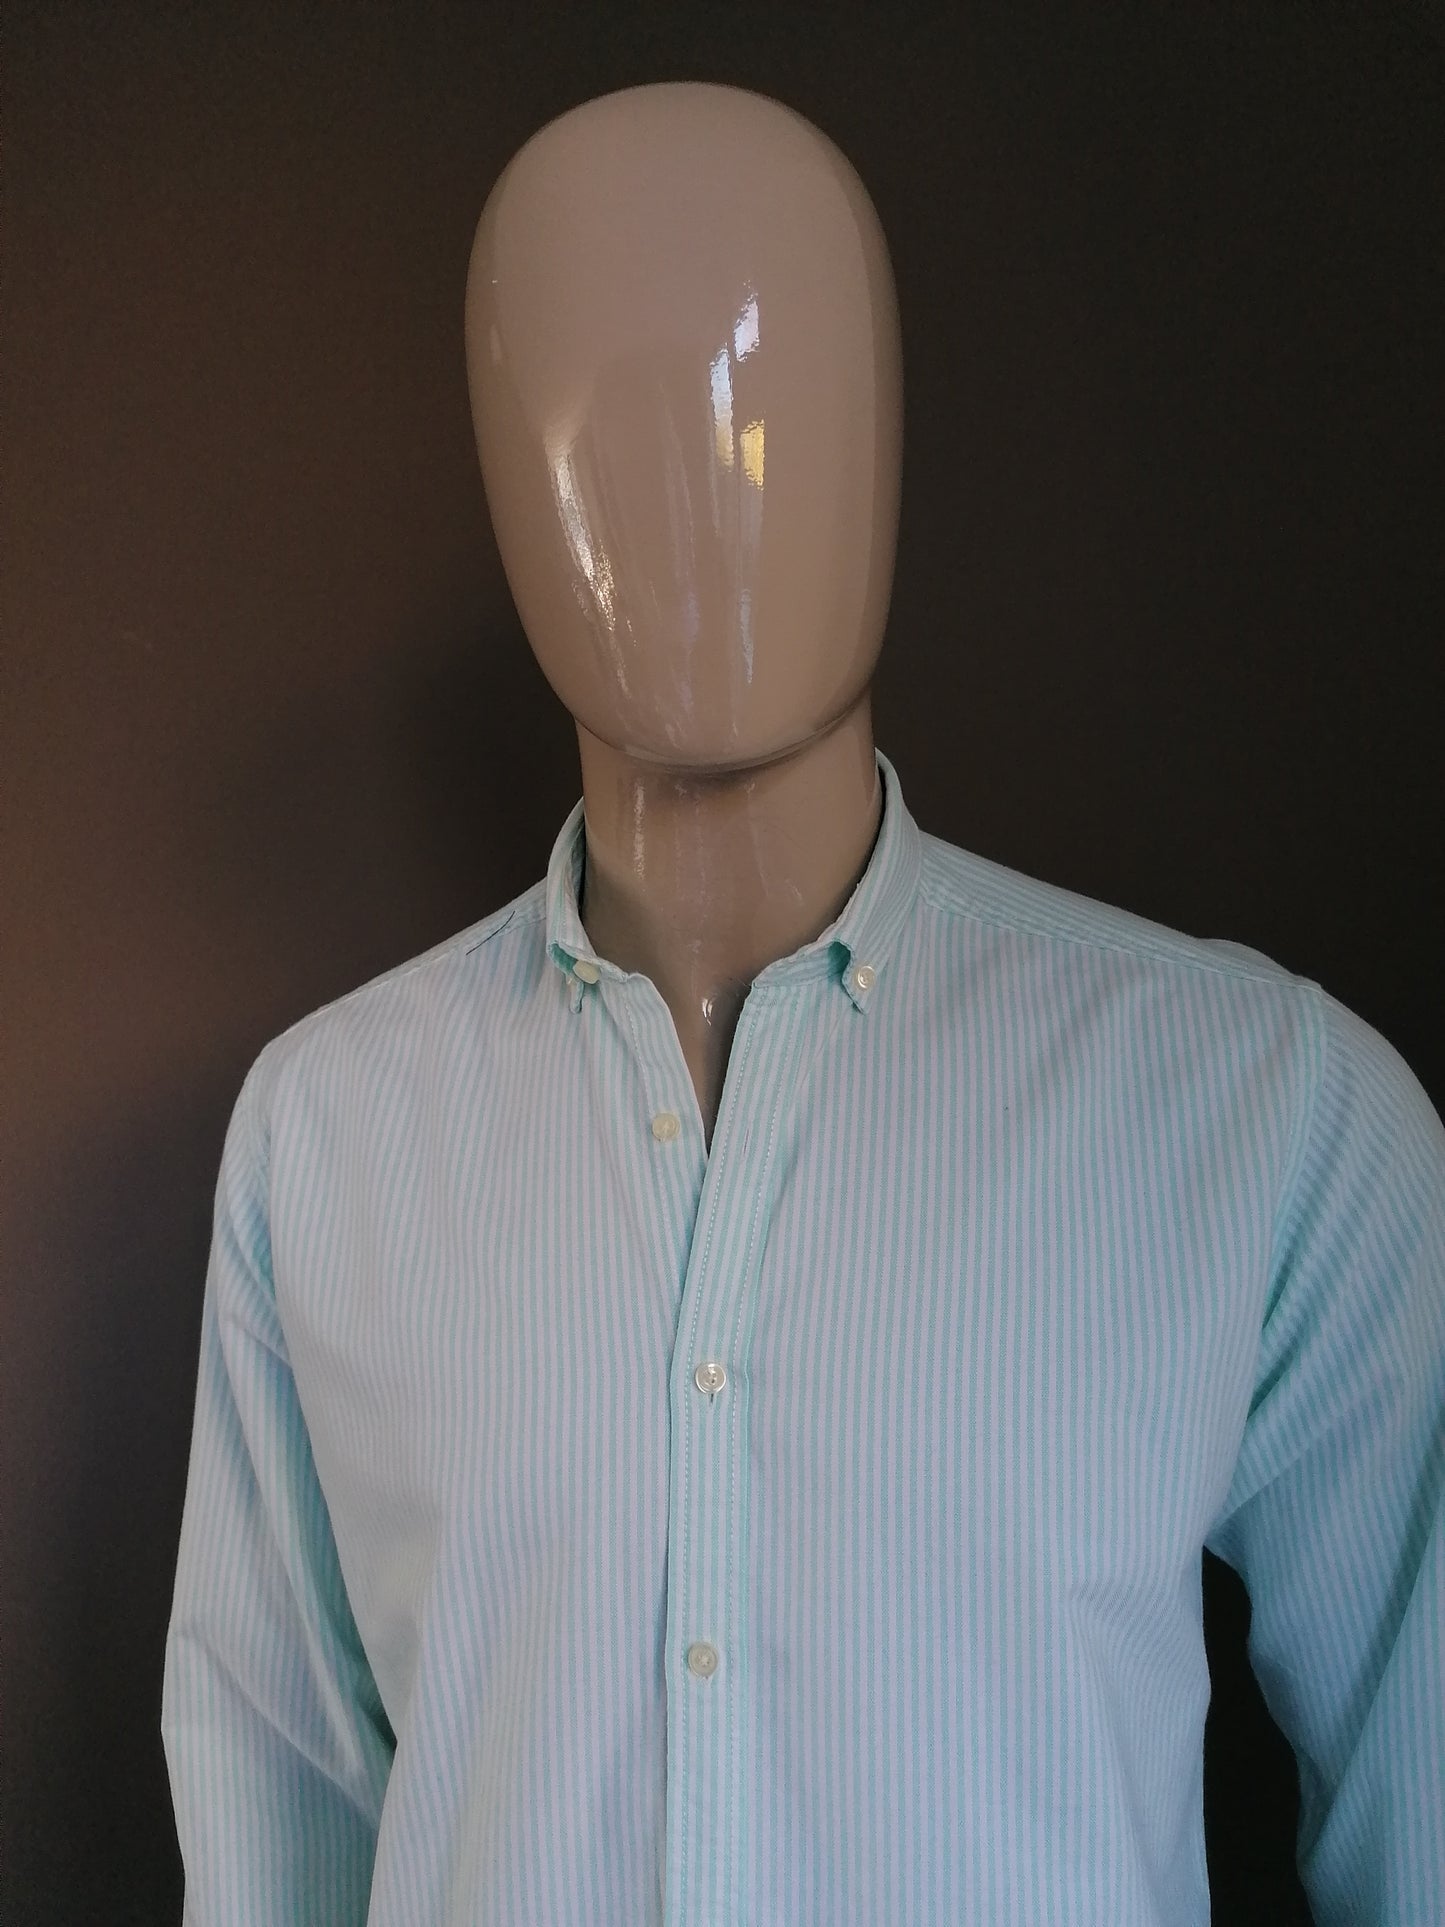 Chemise McNeal. Vert blanc rayé. Taille M.